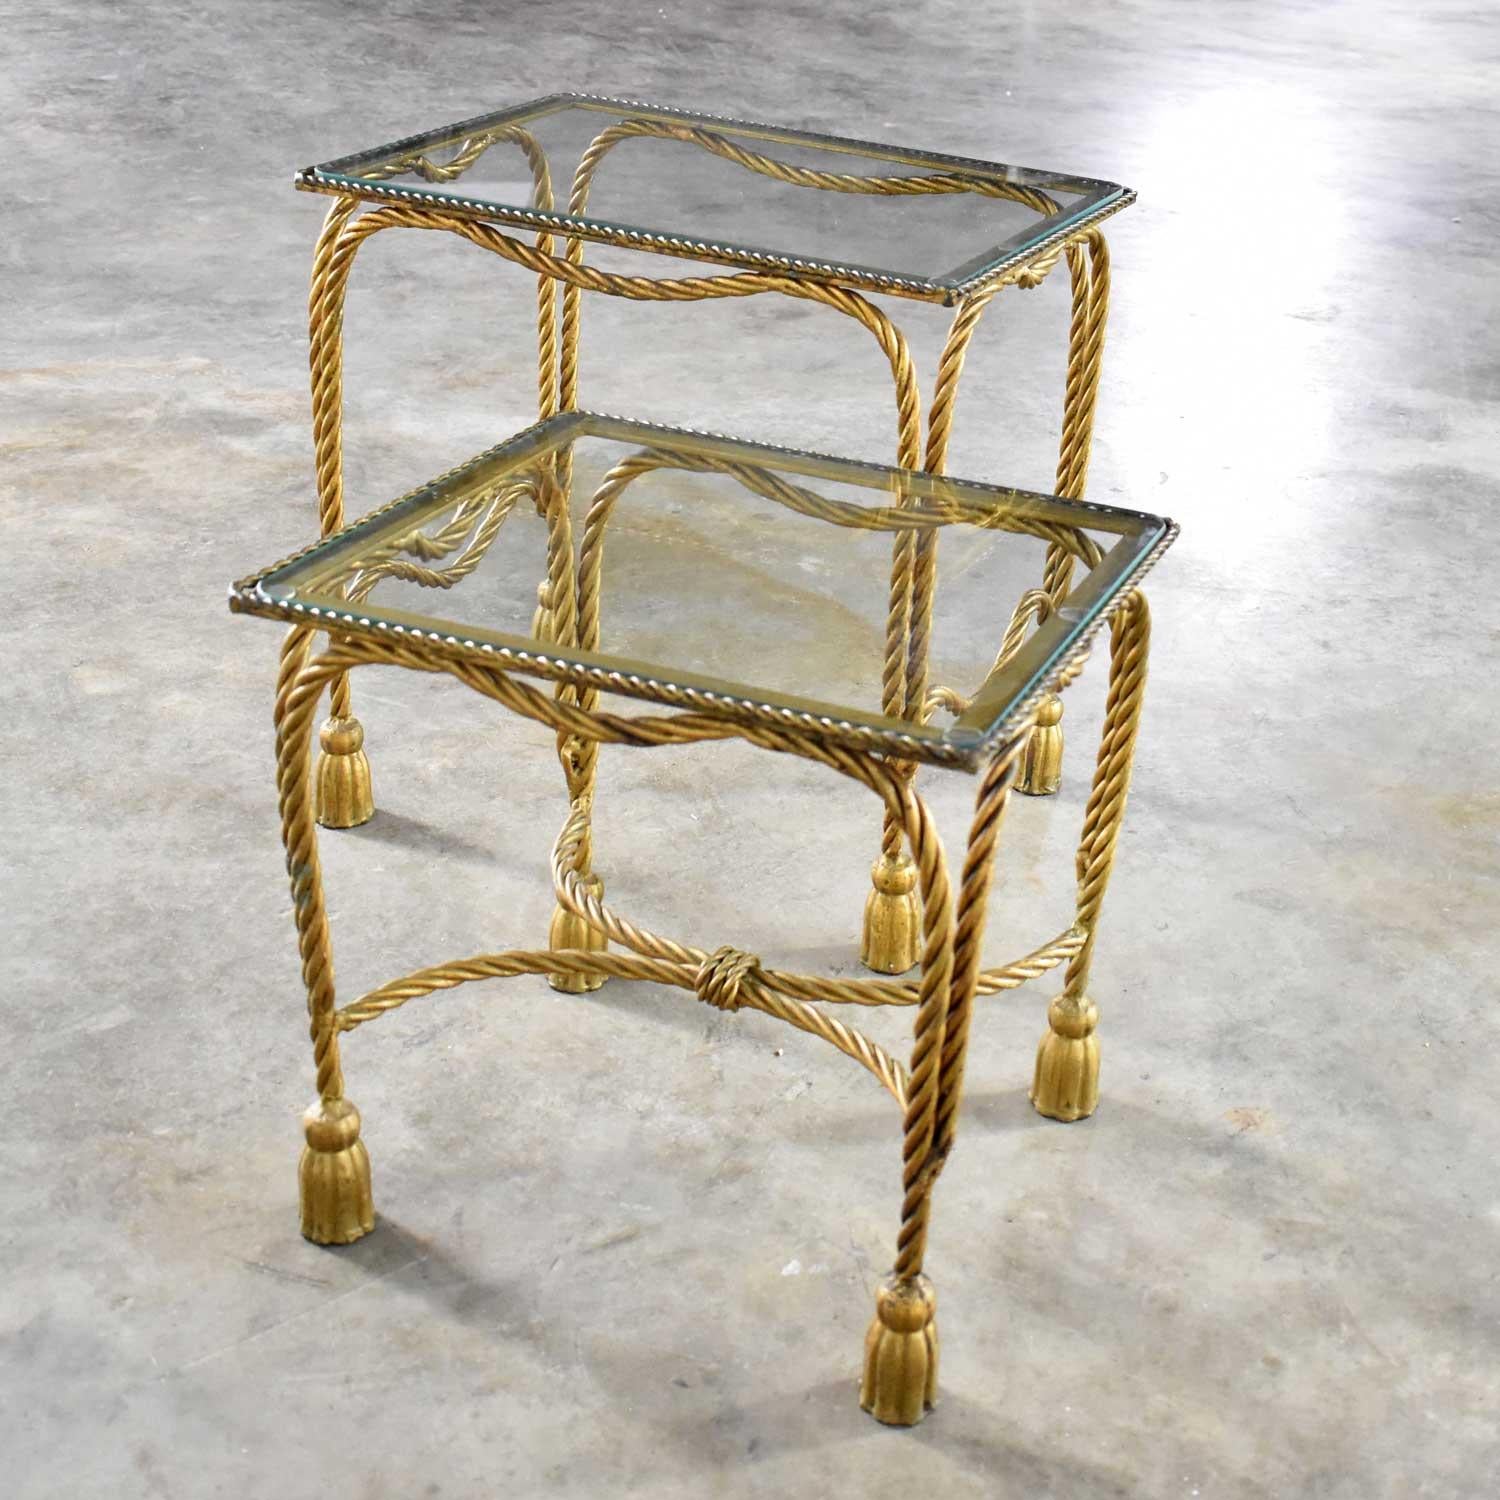 Metal Set of Two Hollywood Regency Gilt Rope and Tassel Nesting Tables with Glass Tops